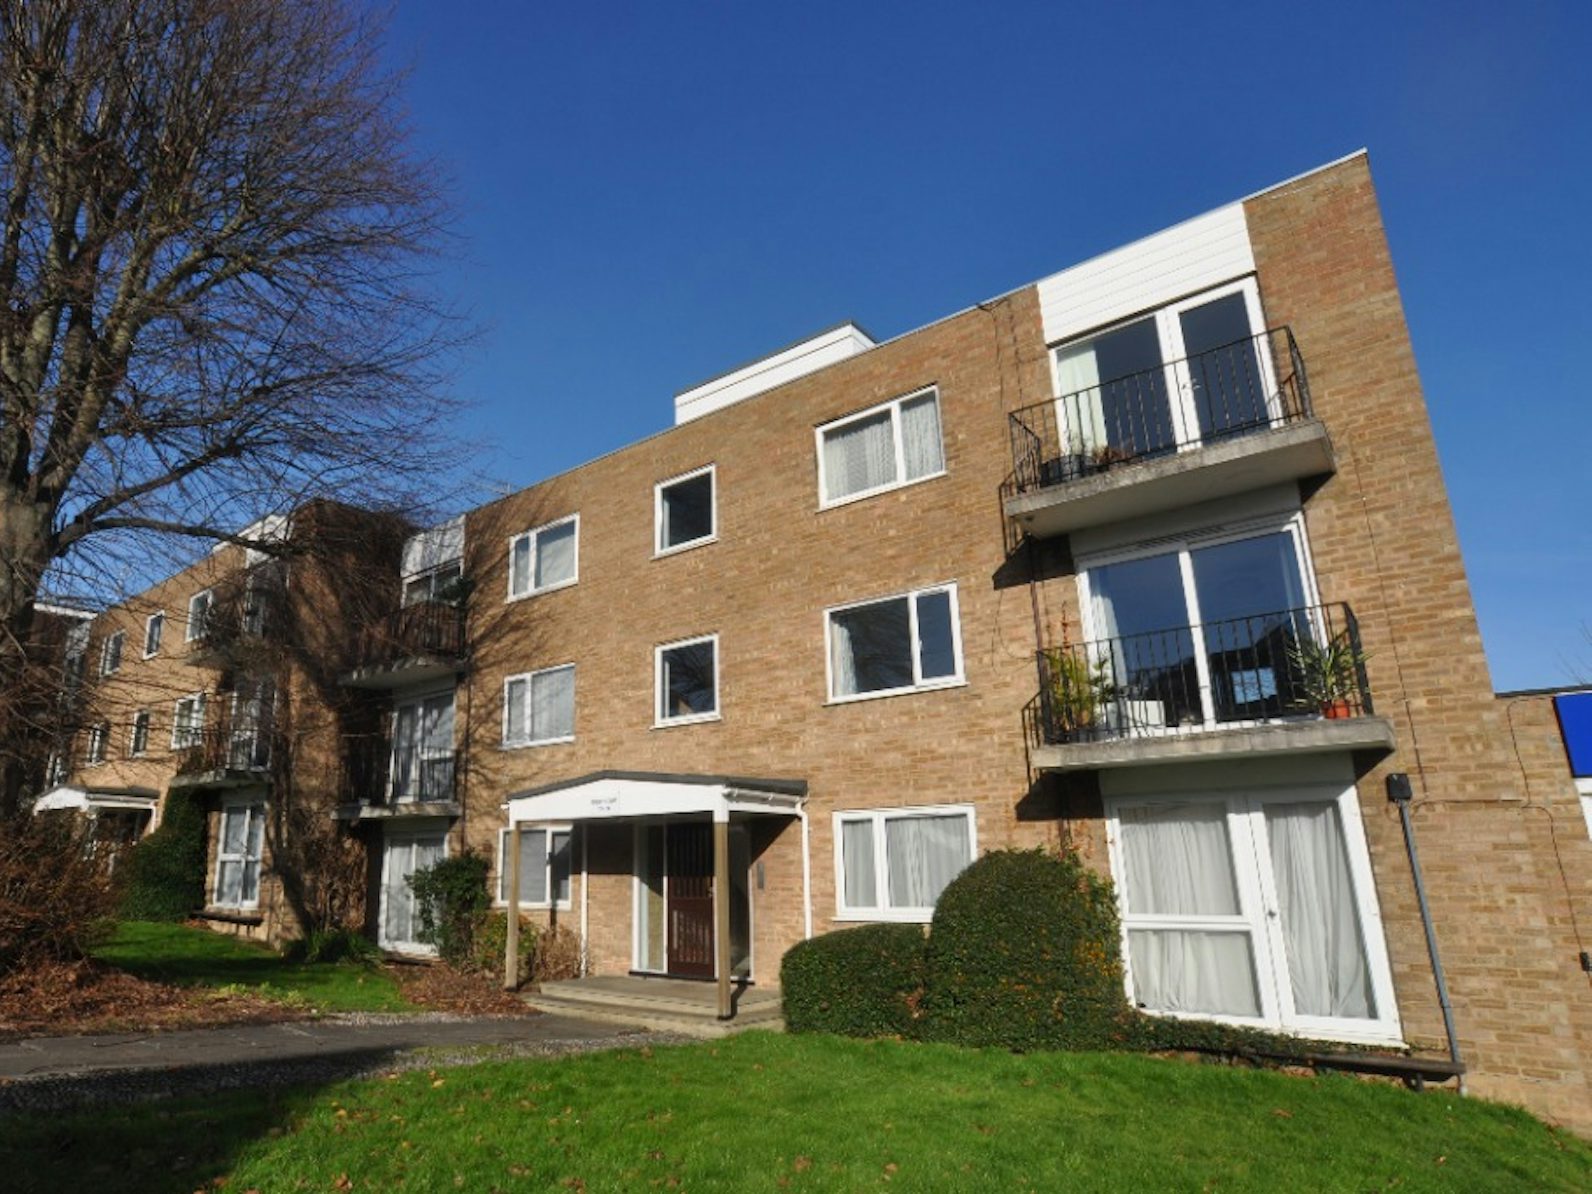 Flat to rent on Priory Court Hitchin, SG4